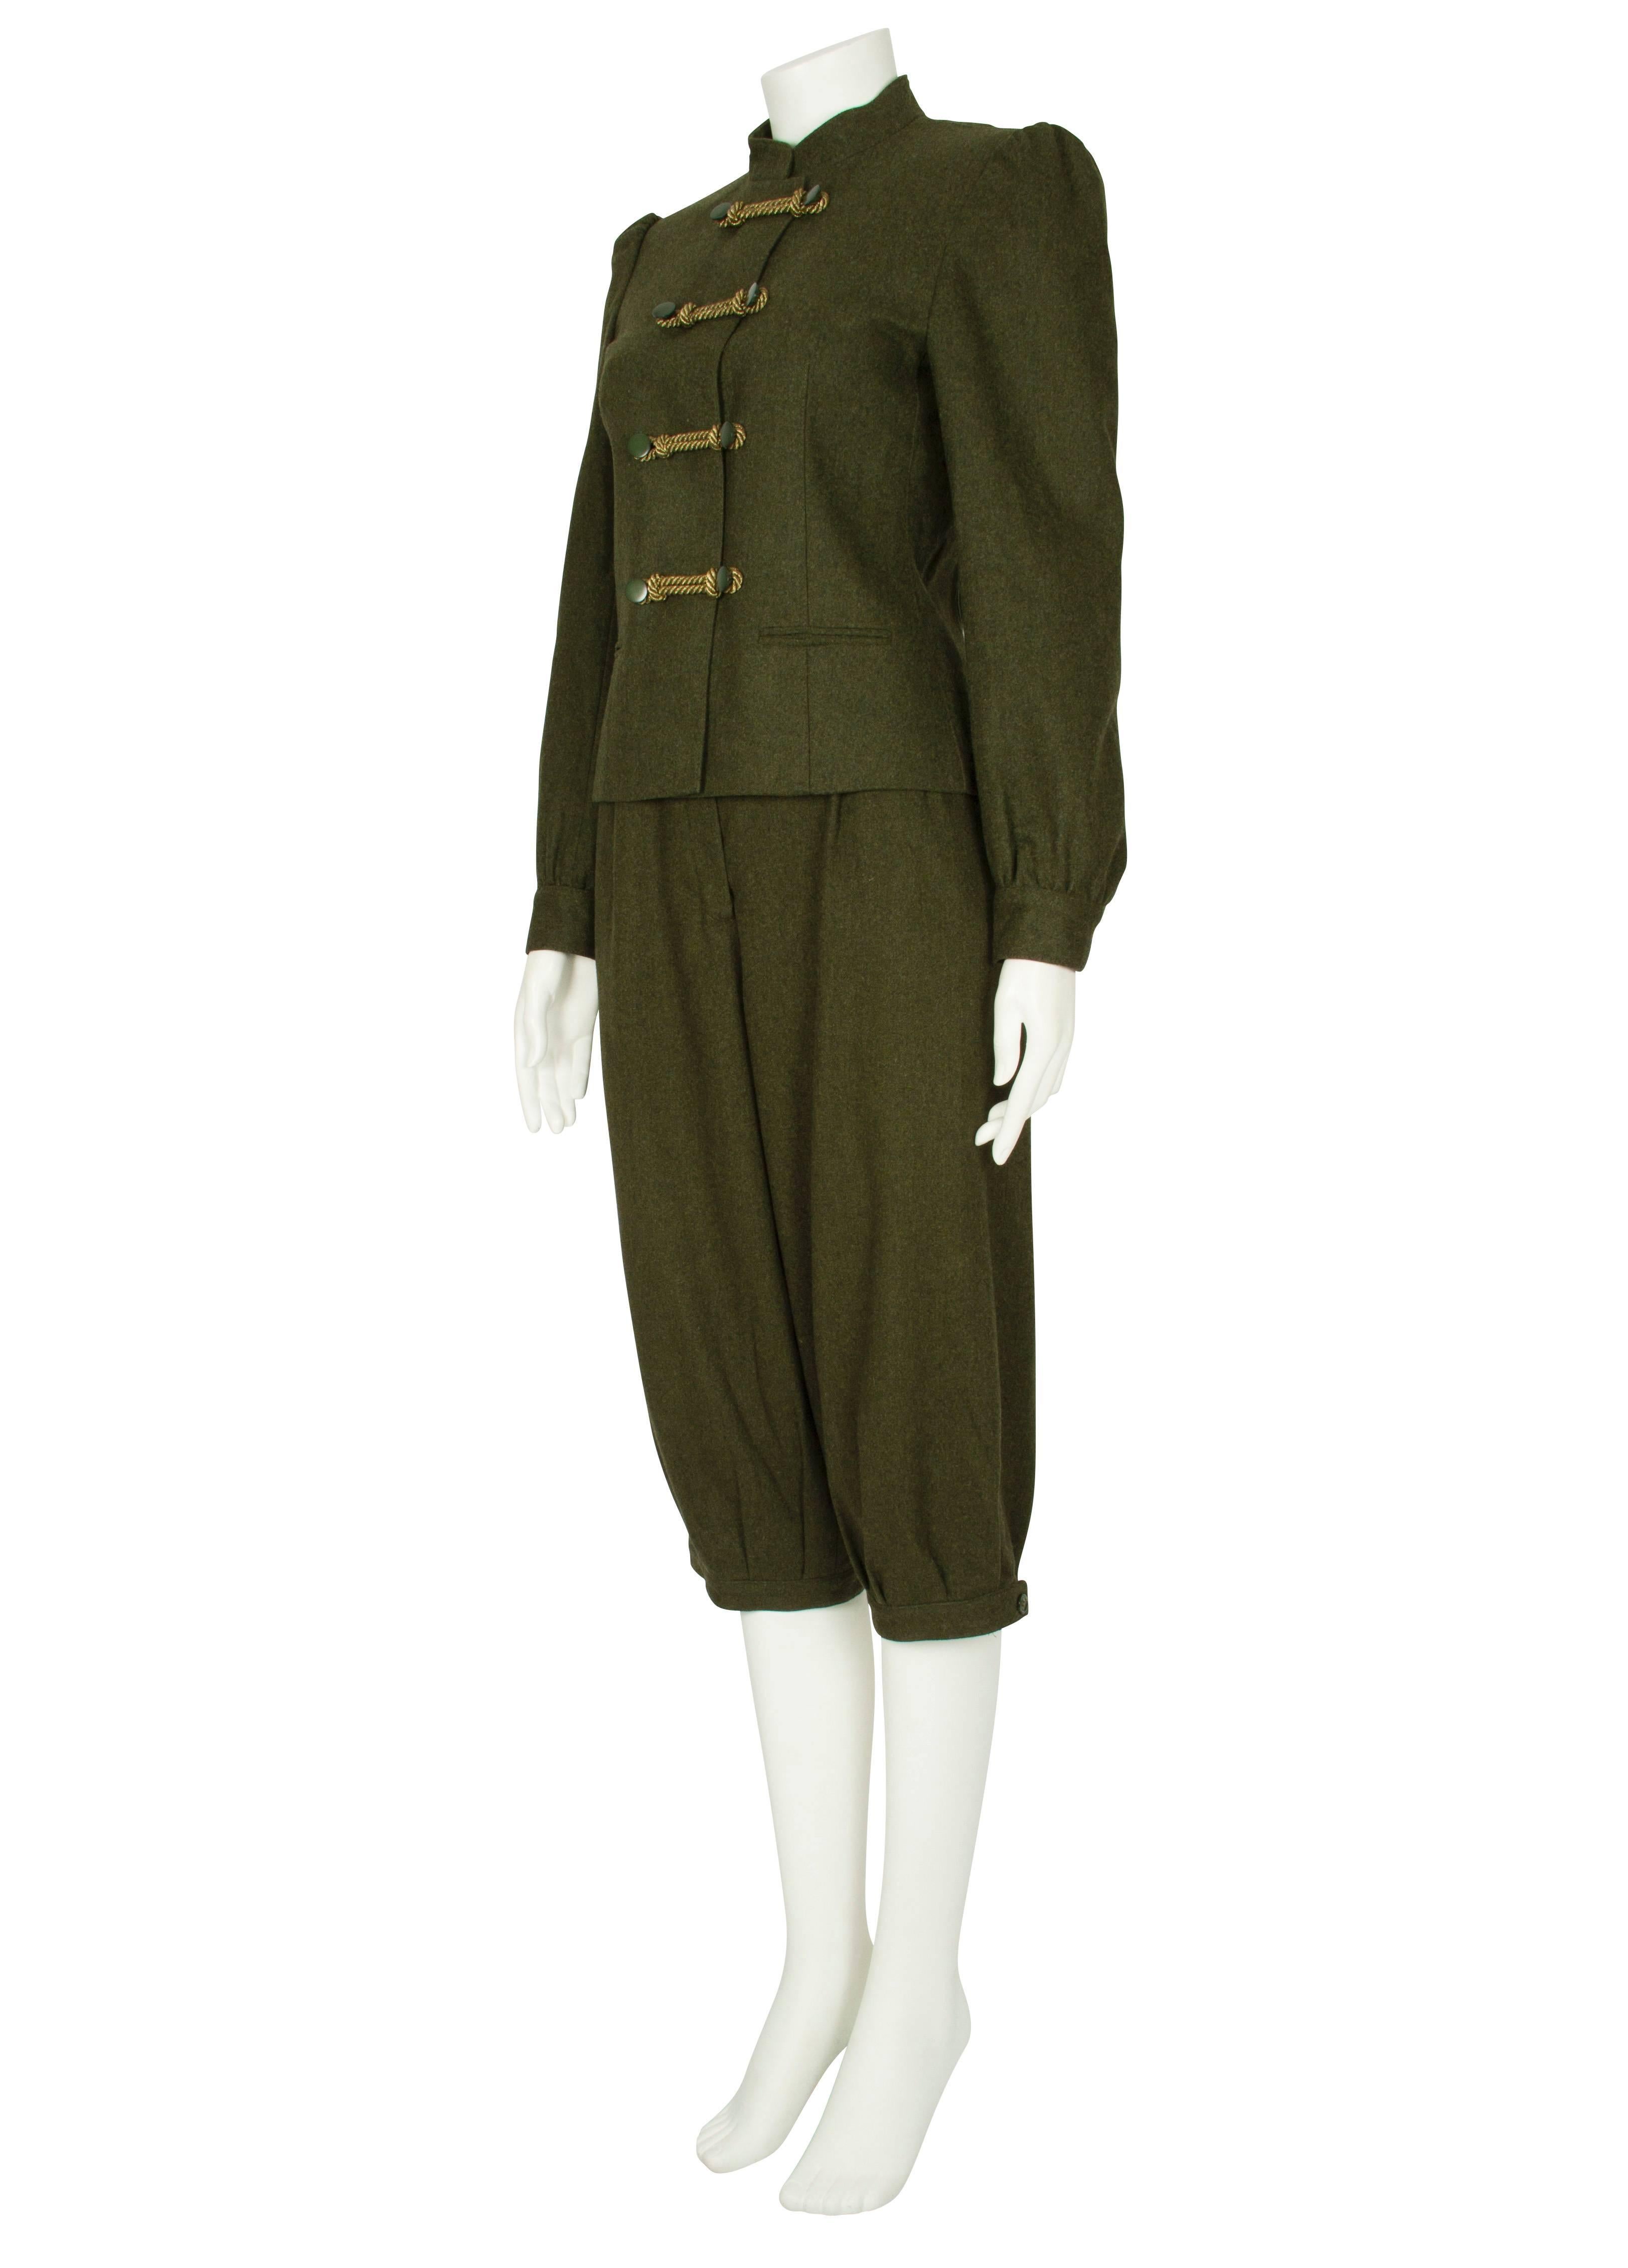 This unique moss green wool hunting ensemble features a cropped waist length fitted jacket with a stand up band collar and two side slit pockets. Fully lined in green viscose, the jacket has beautiful thick golden rope toggles that provide a